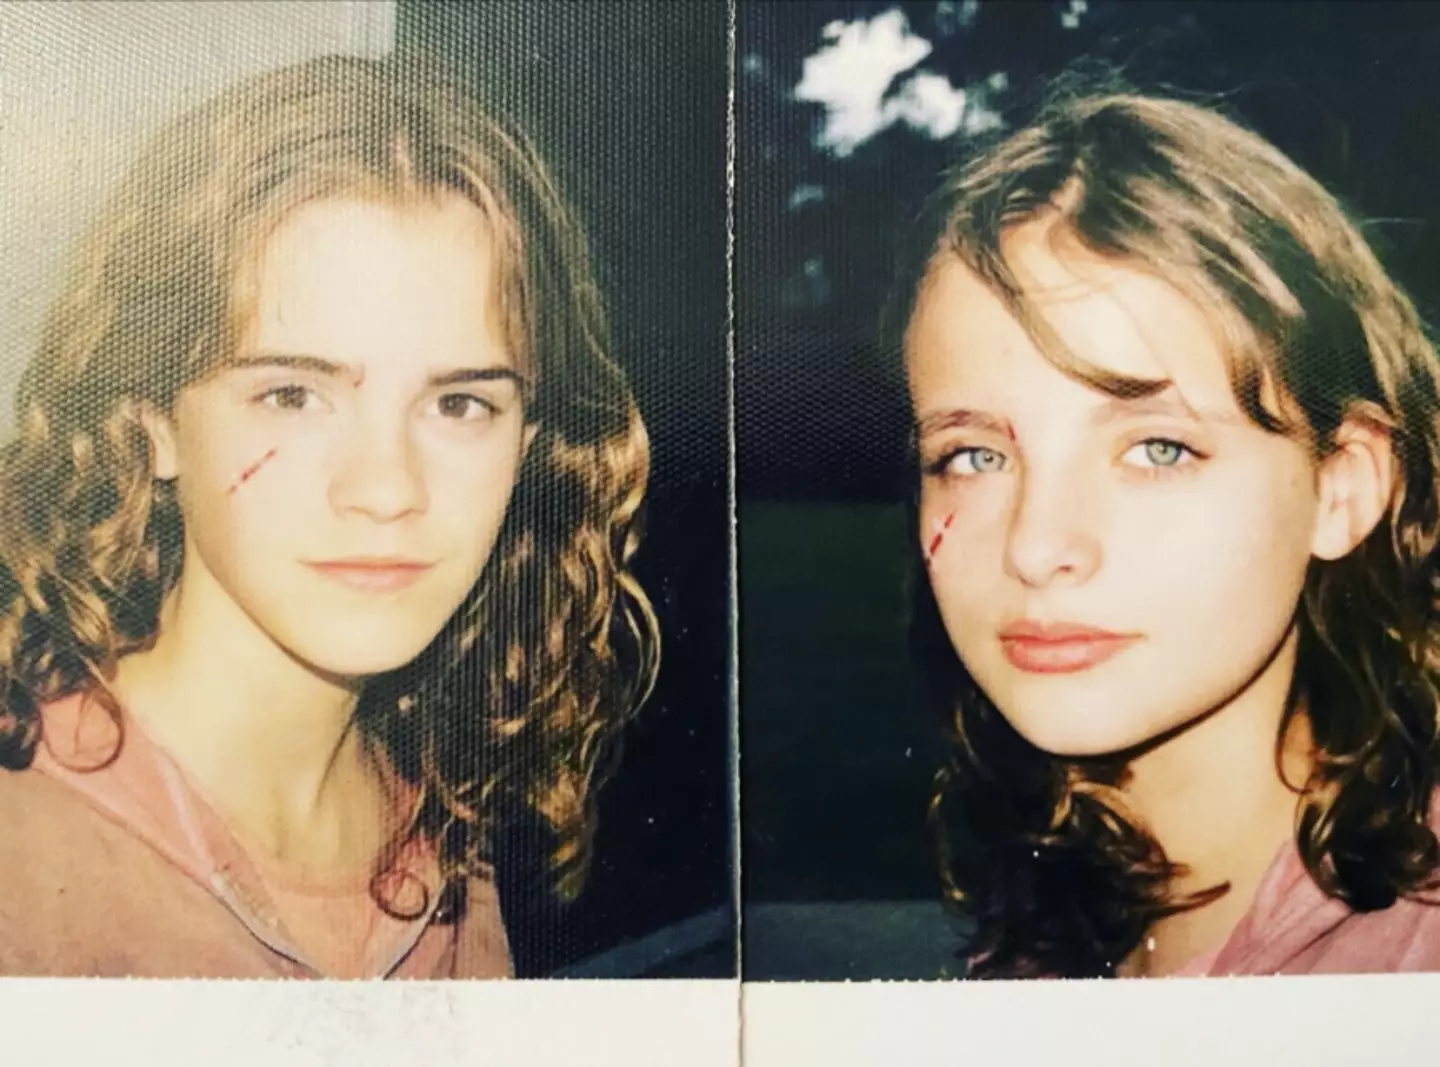 Flick Miles was Emma Watson's body double in the first three Harry Potter movies.